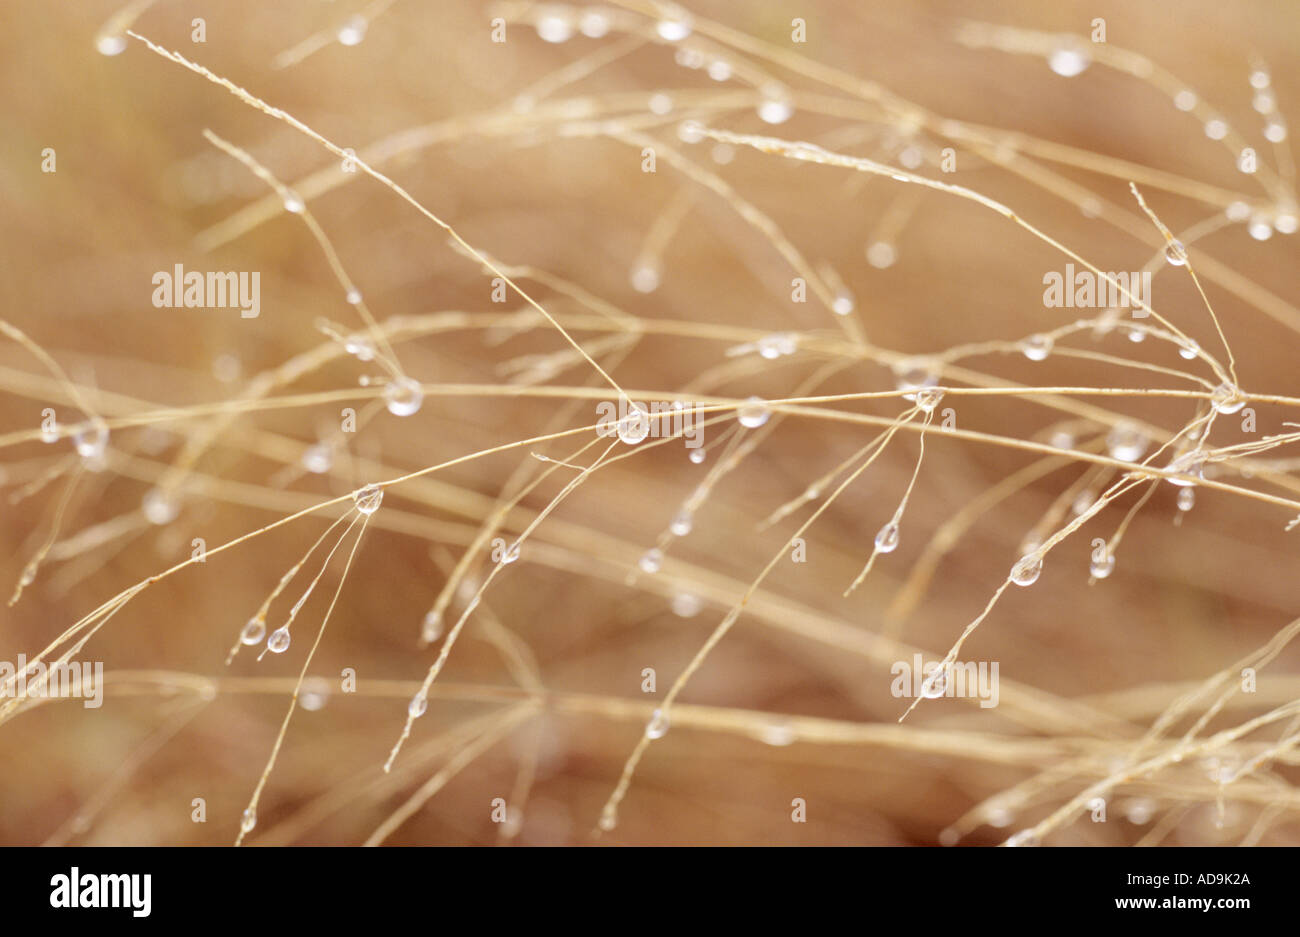 Close up of drops of dew or rain suspended on dried winter grasses Stock Photo